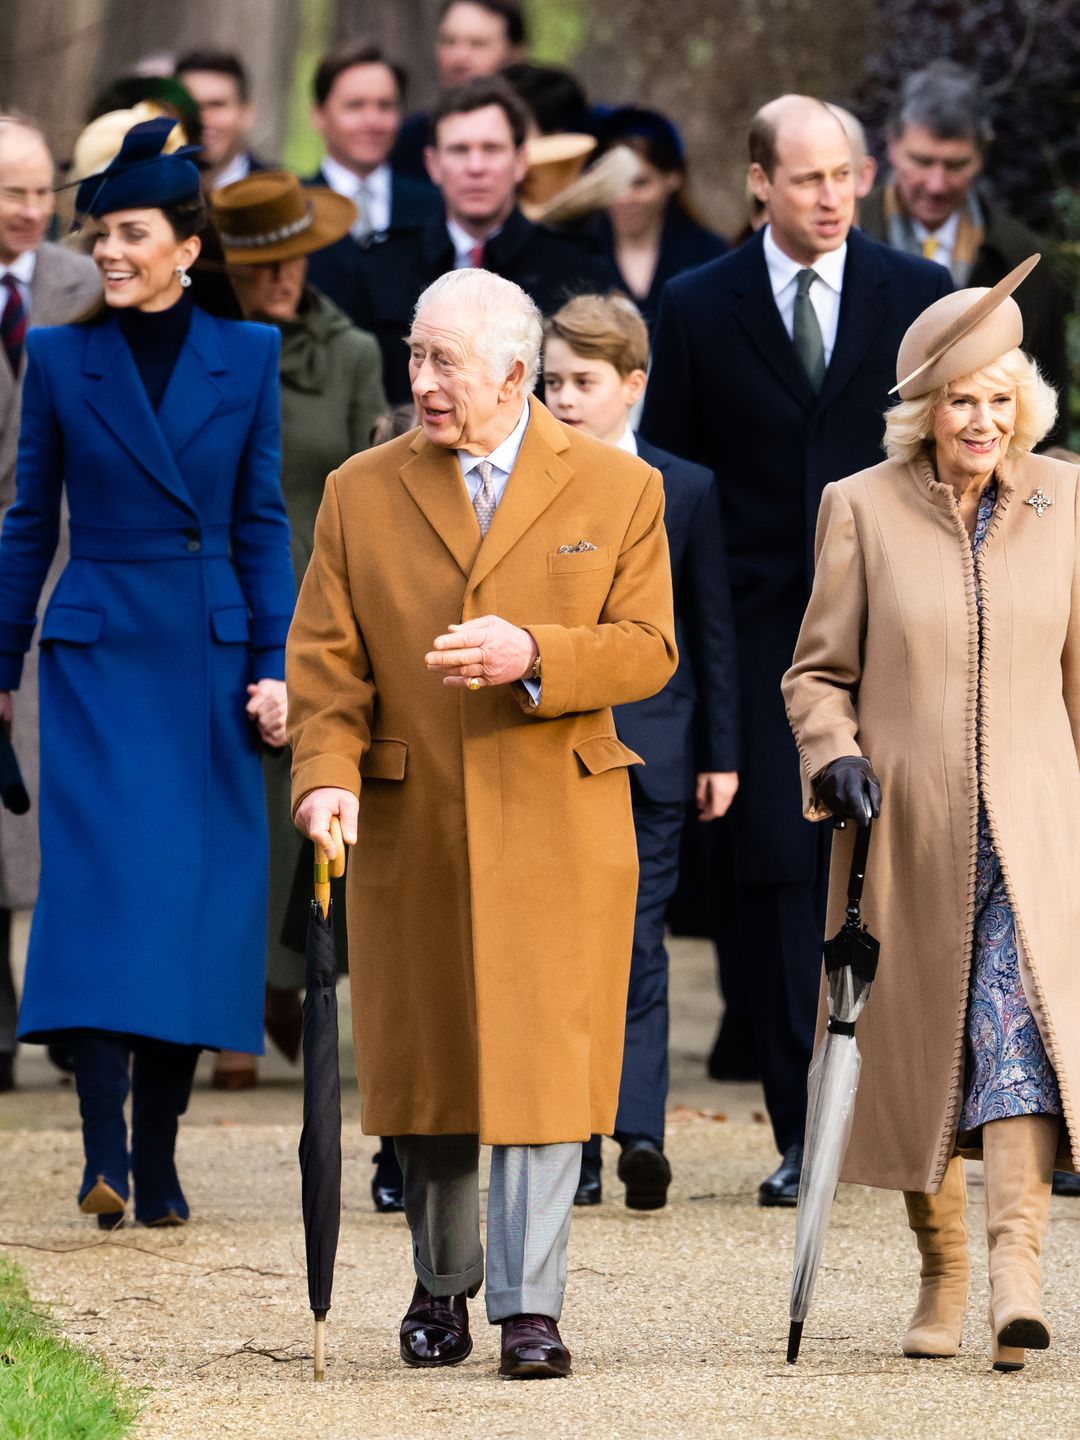 King Charles and Queen Camilla walking with Kate Middleton, Prince George and Prince William behind them